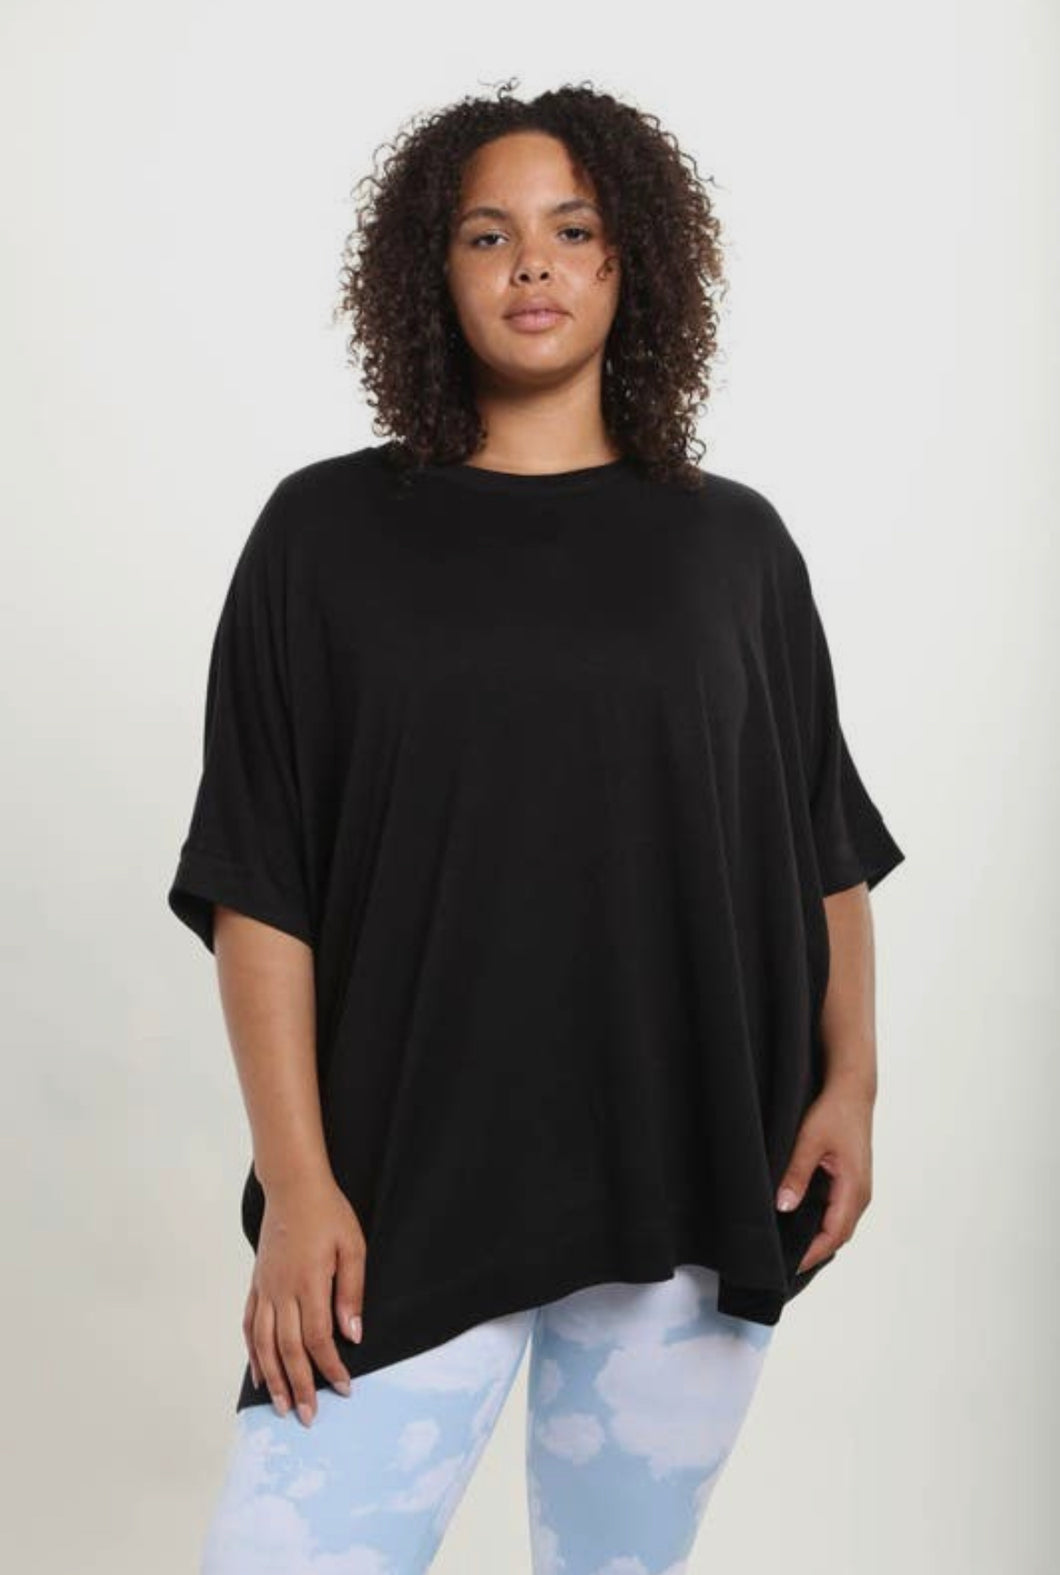 Plus Size Cape Shirt with Mid Sleeves